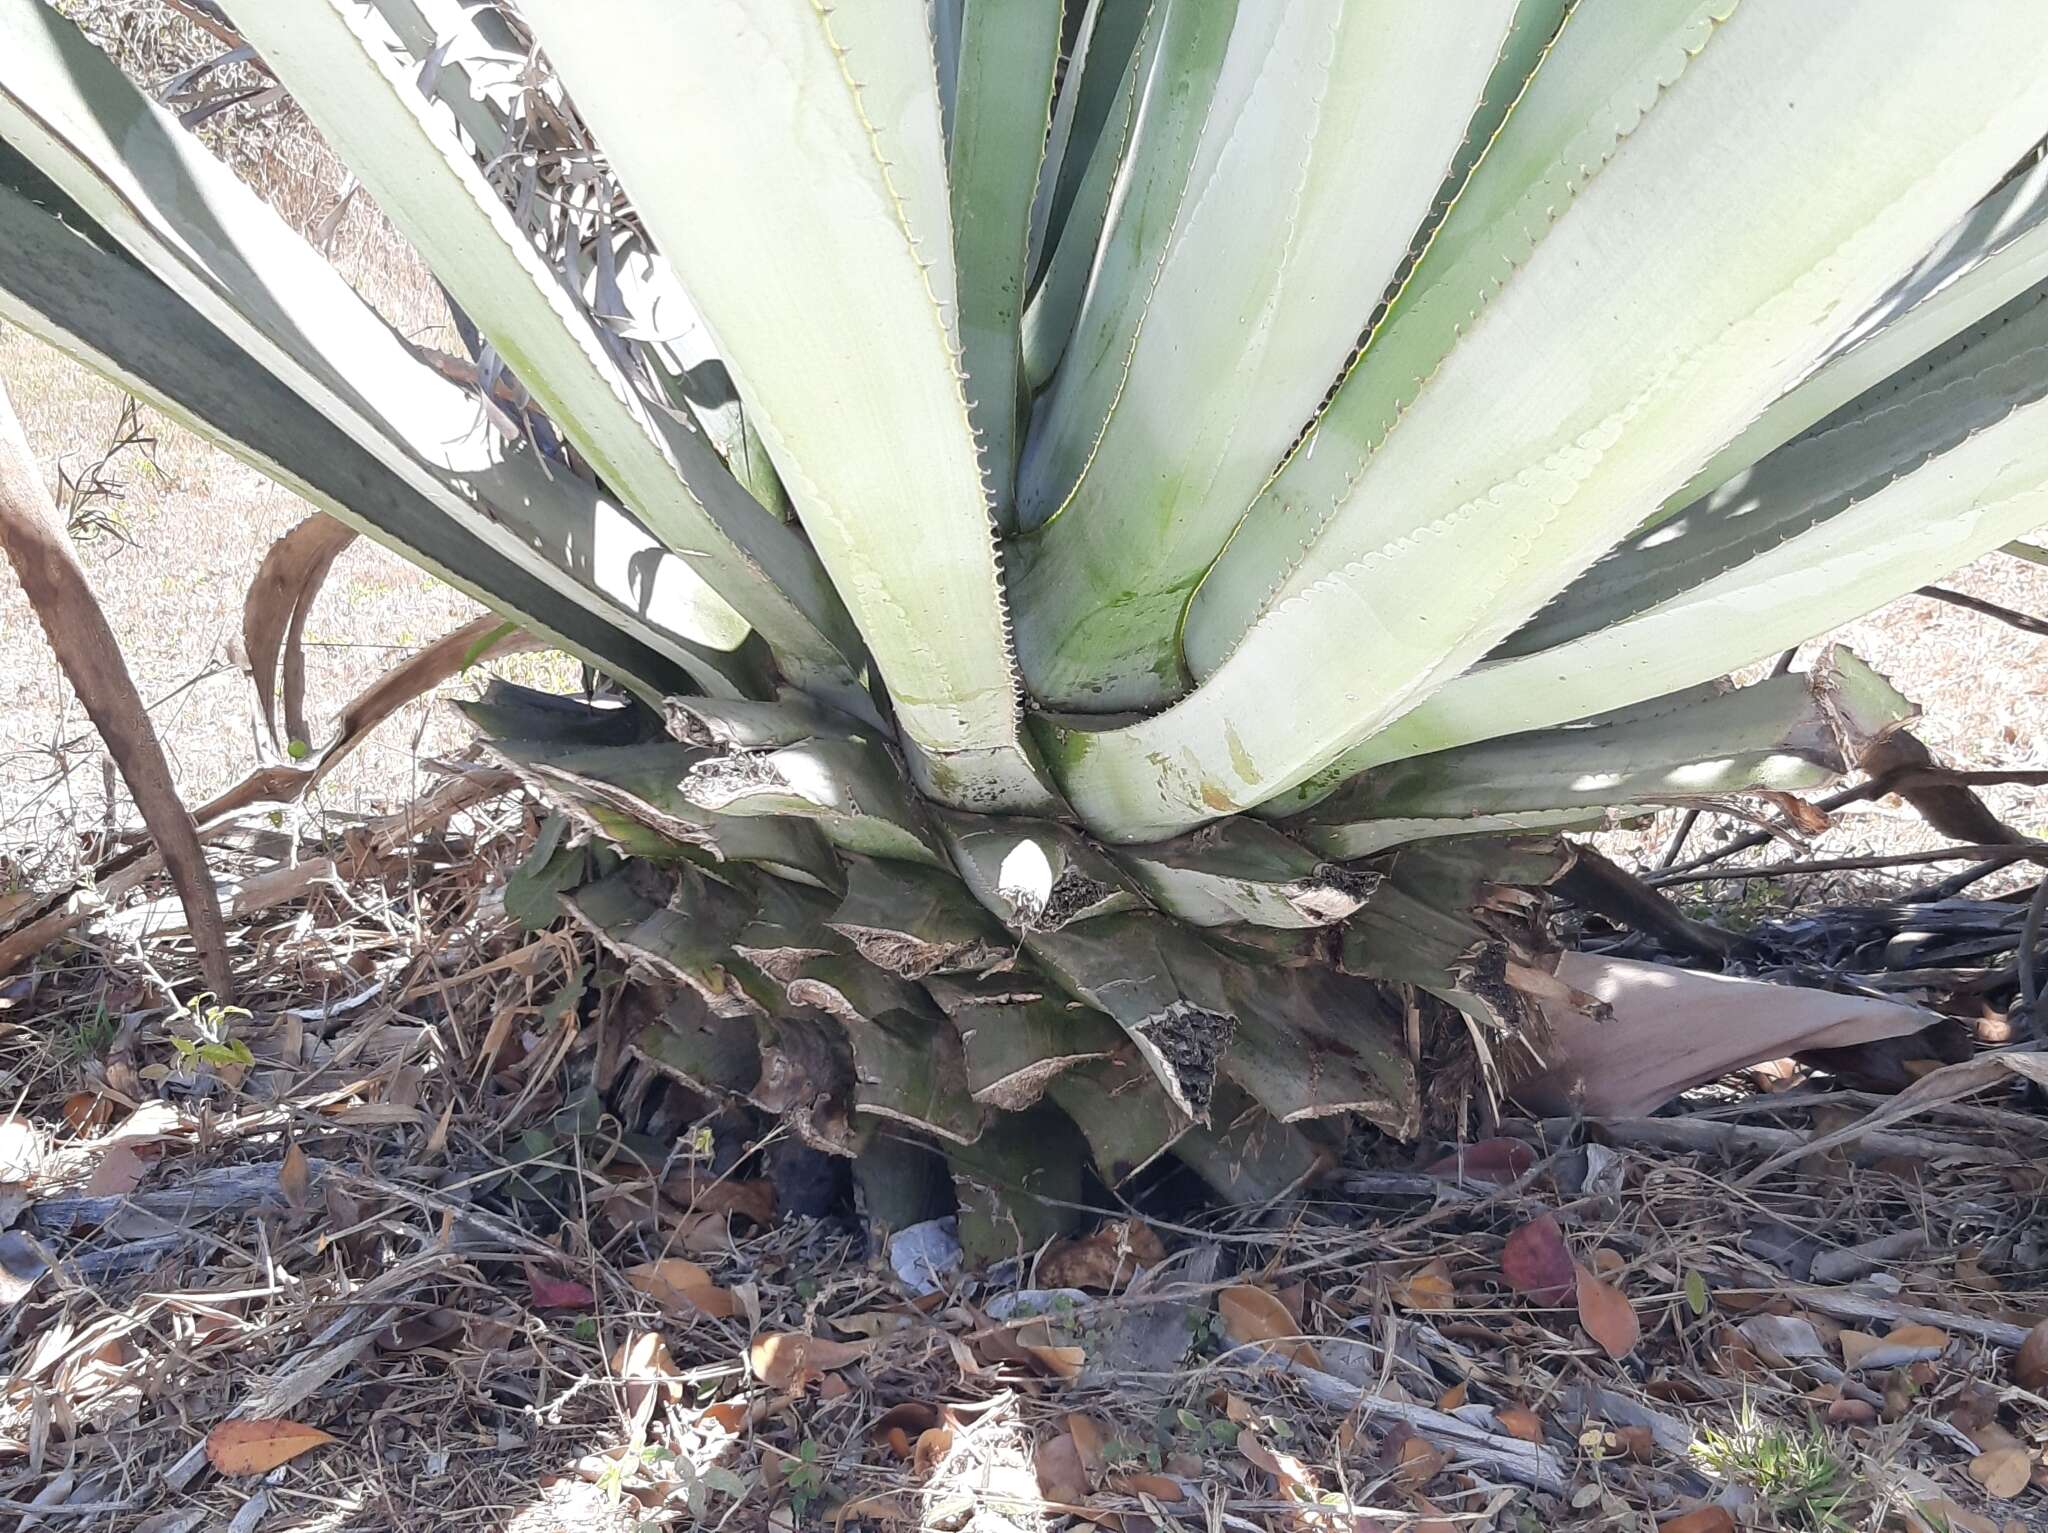 Image of tequila agave